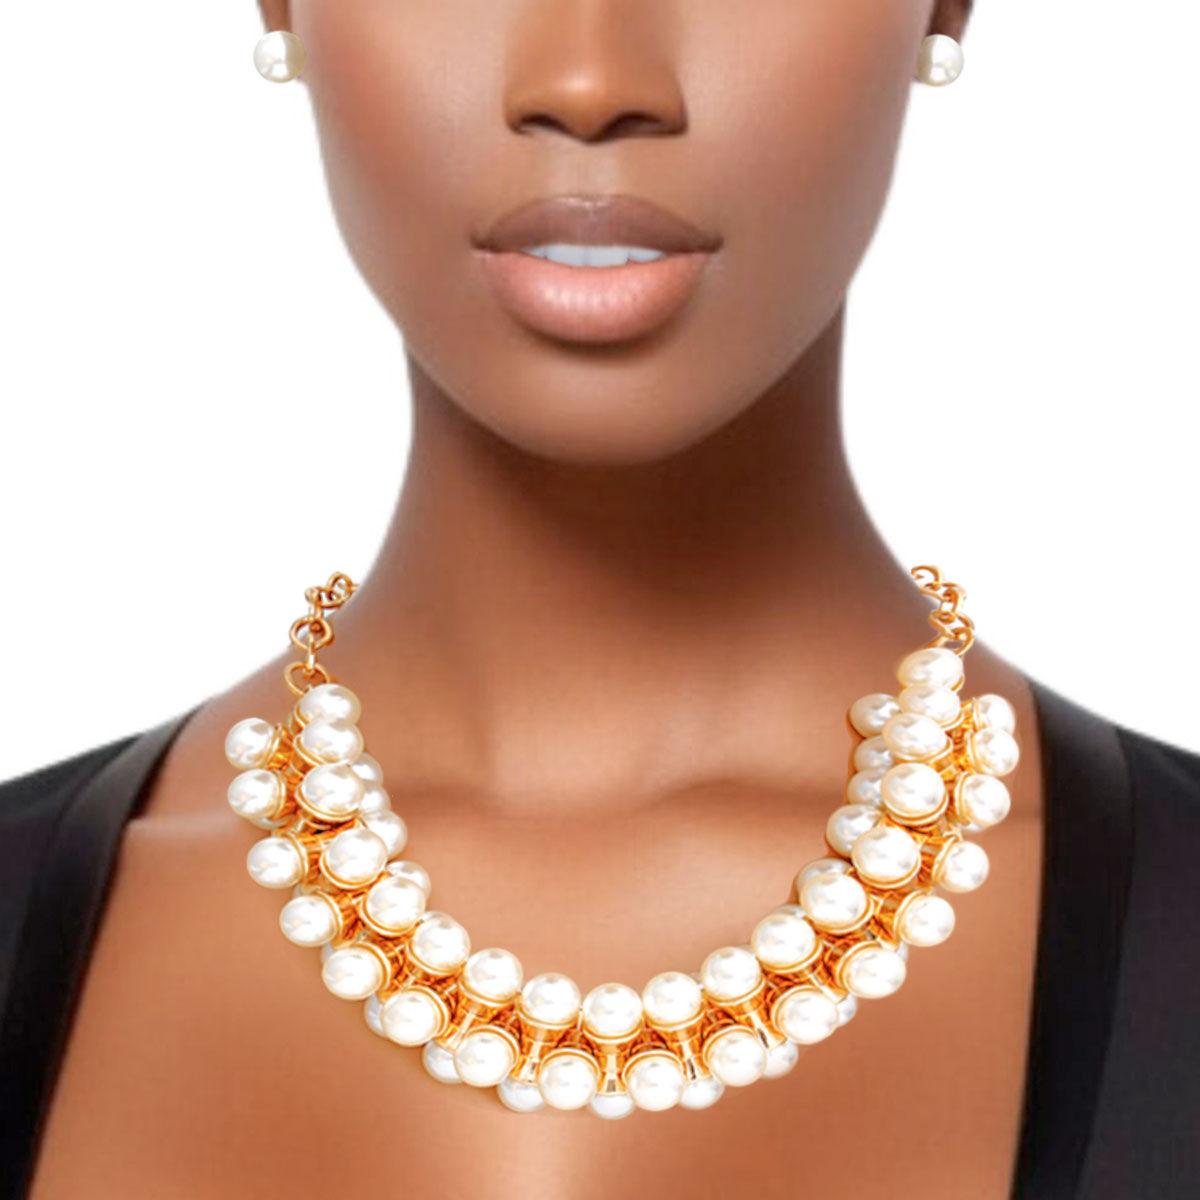 Exquisite Gold Cream Pearl Necklace Set: Blend of Elegance & Style